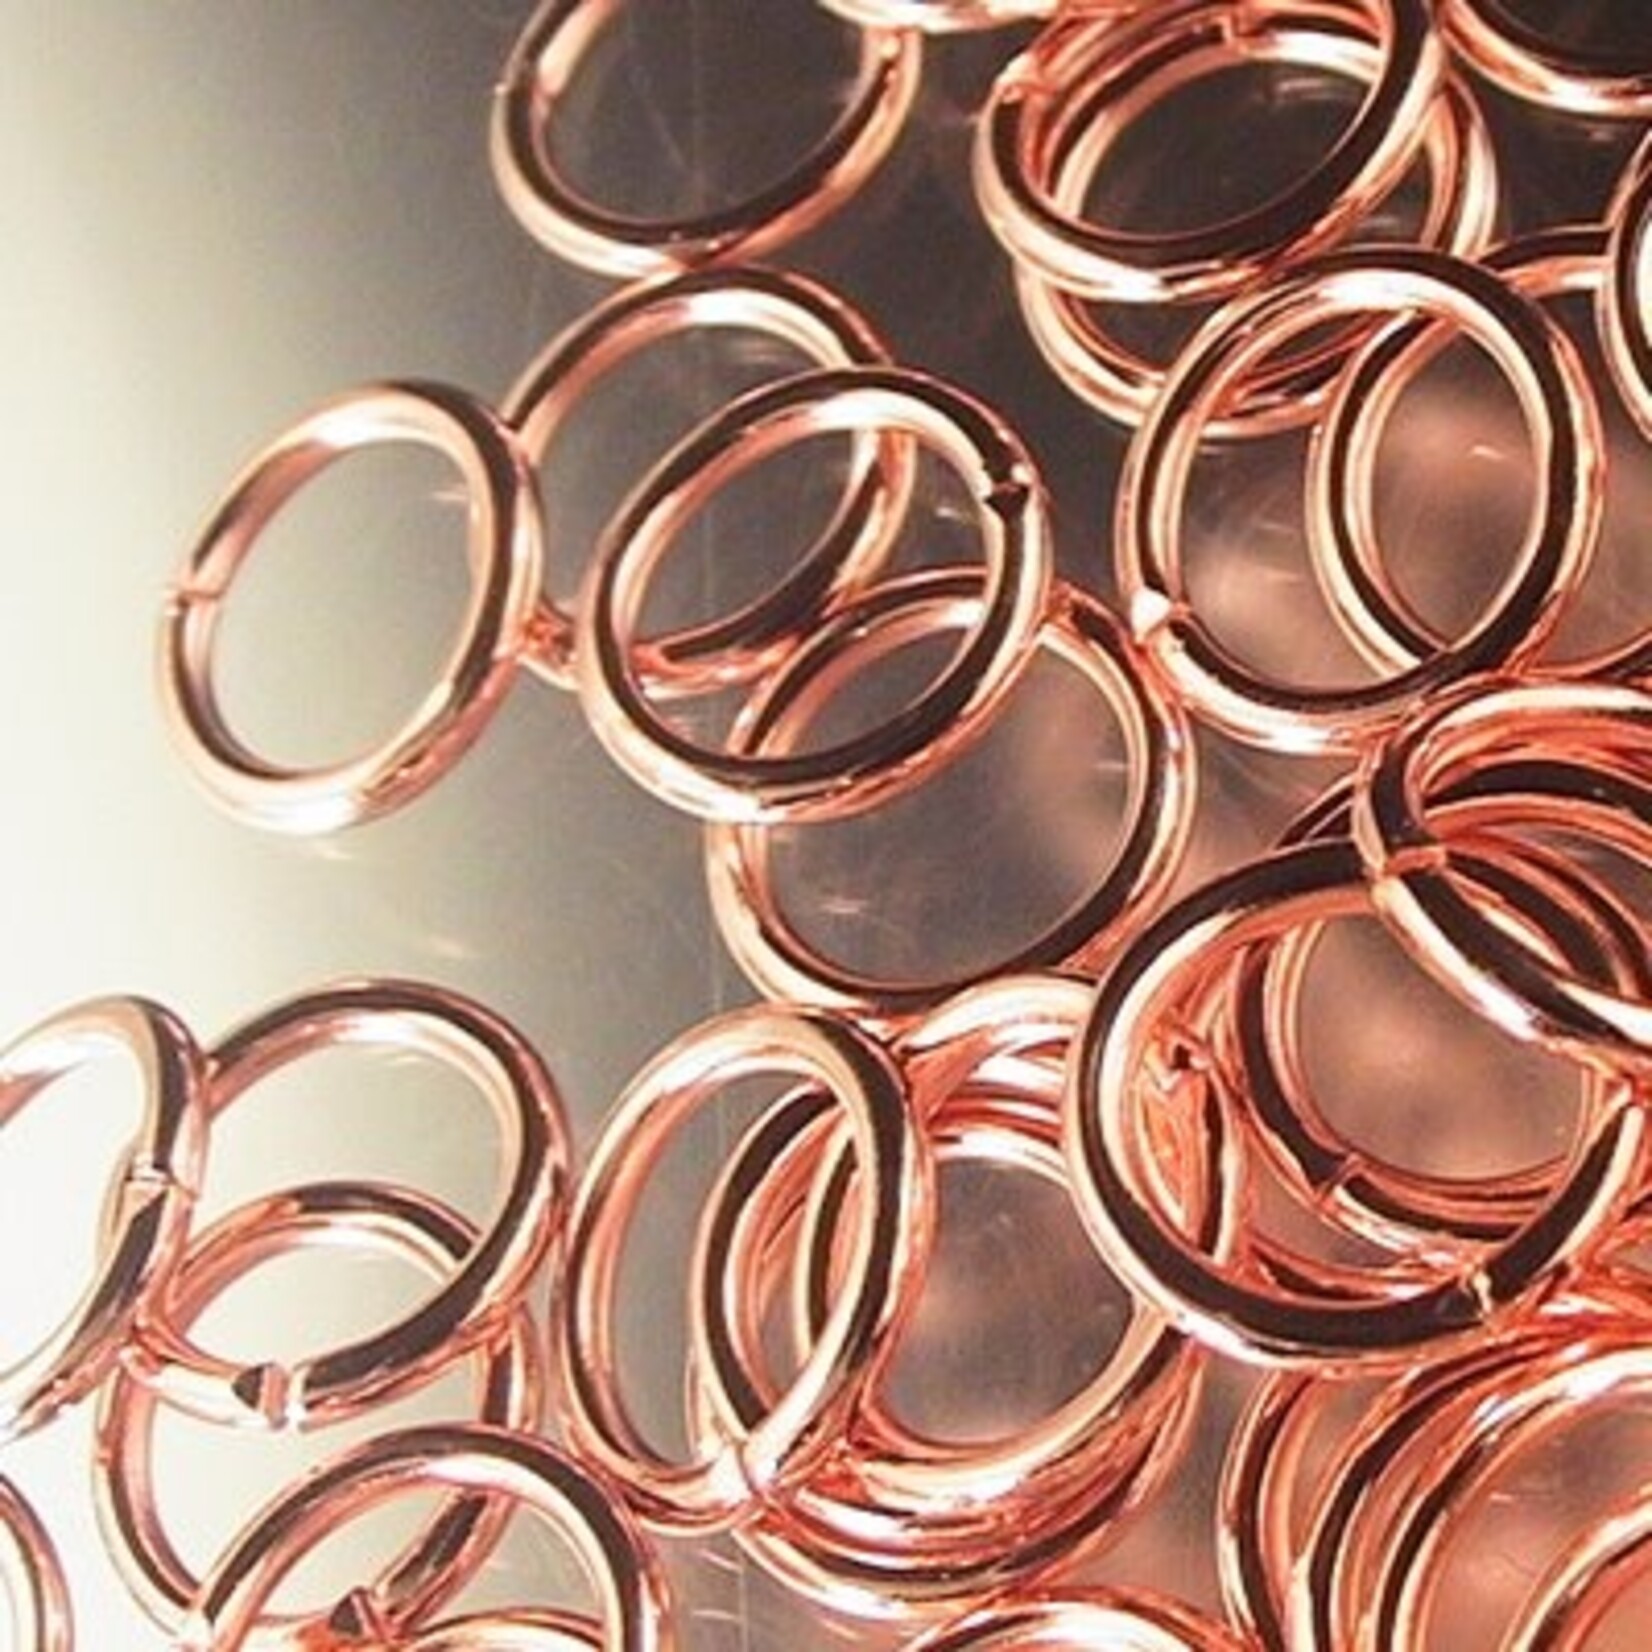 Jump Rings 9mm 16ga -Shiny Copper (500 Pieces)